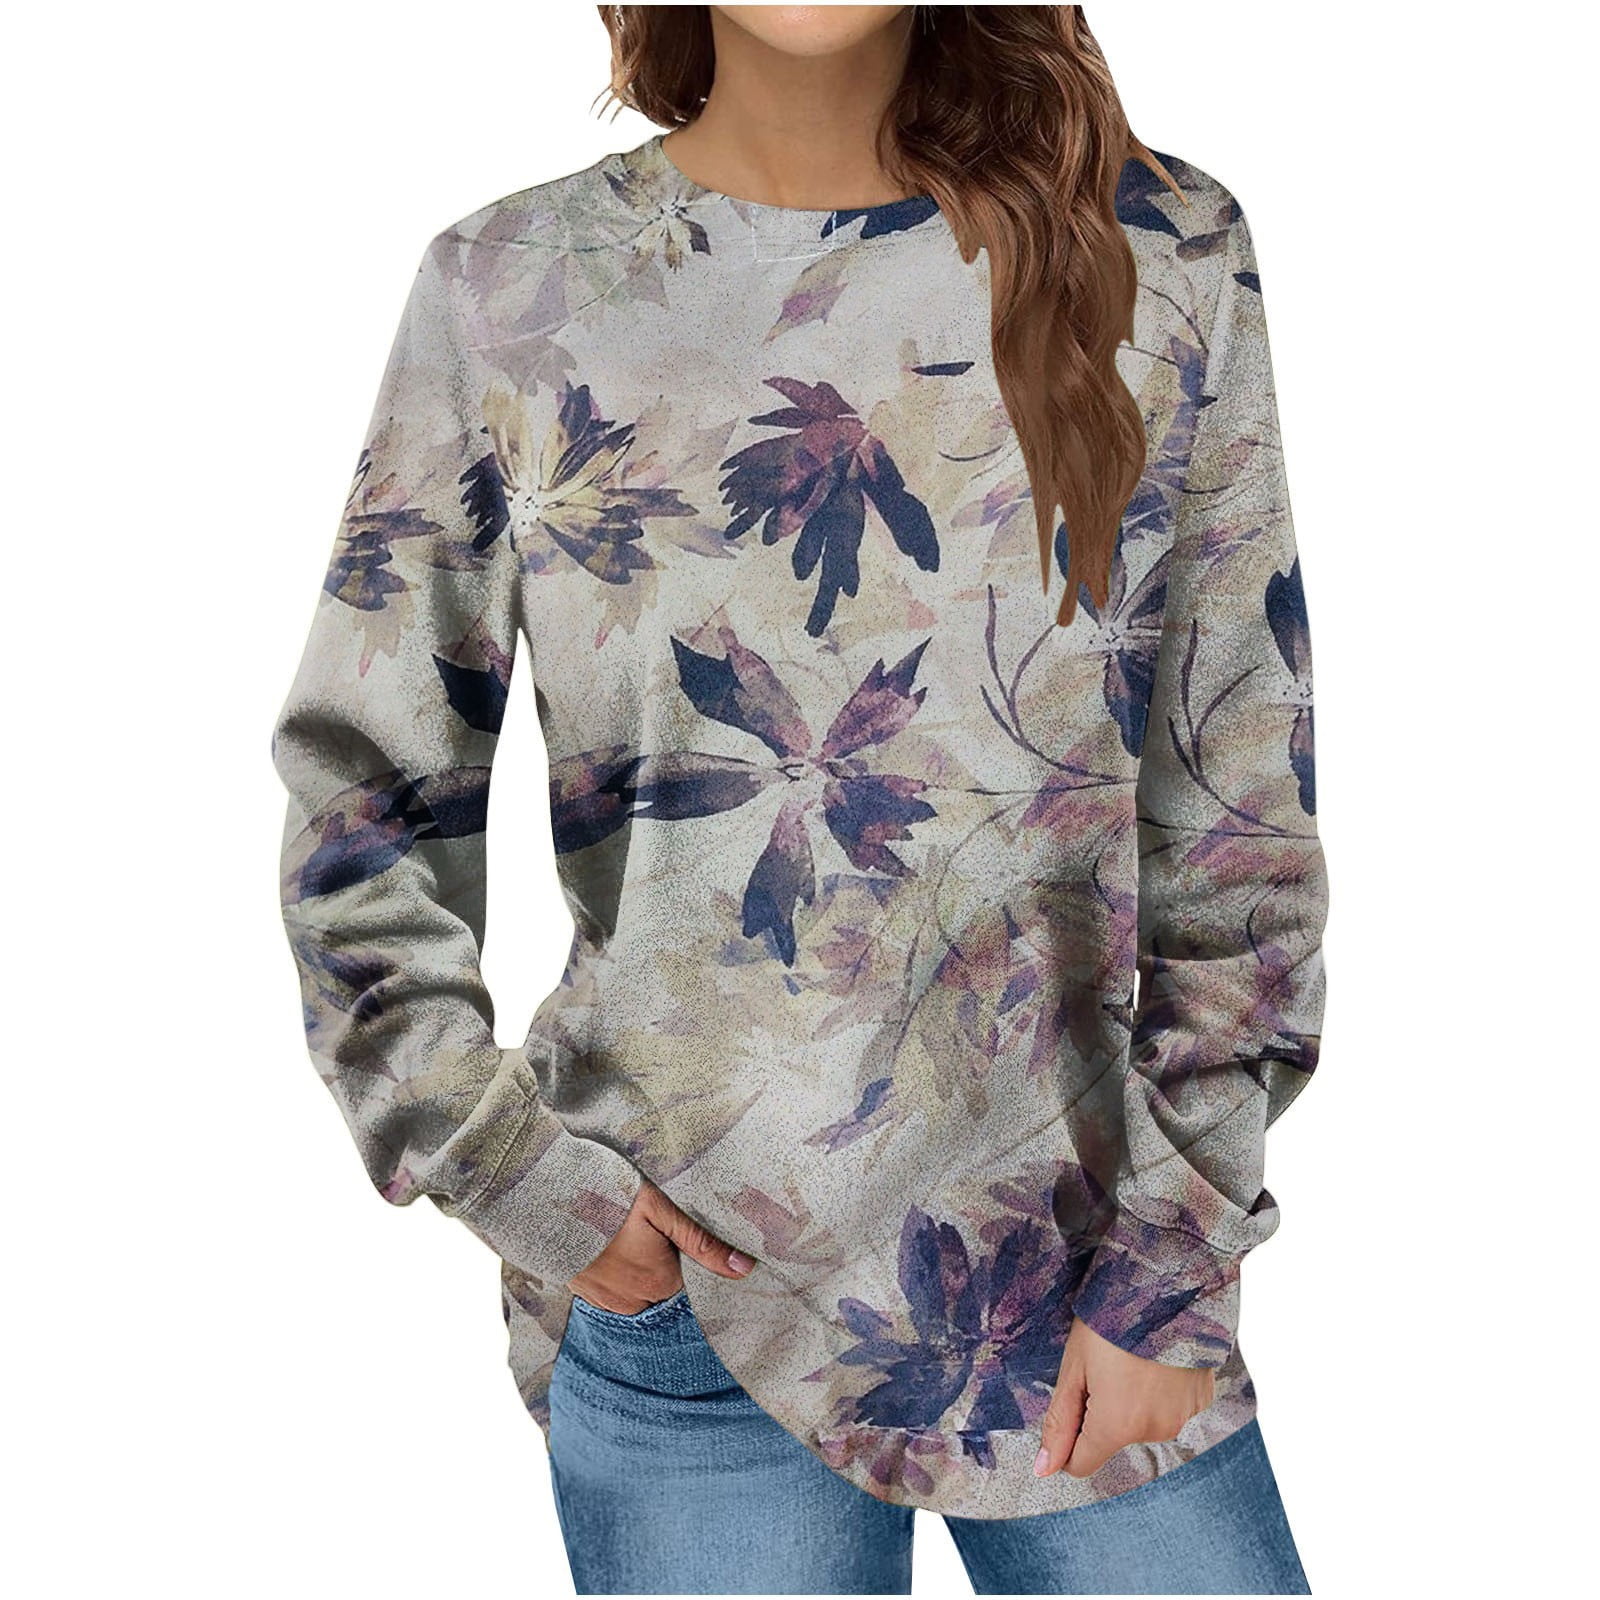  Women'S Autumn And Winter Casual,bulk tshirts for printing  wholesale unisex,1 dollar things,hoodies under 10 dollars,overstock,womens  sweatshirtes clearance,womens skorts for summer casual sale : Clothing,  Shoes & Jewelry